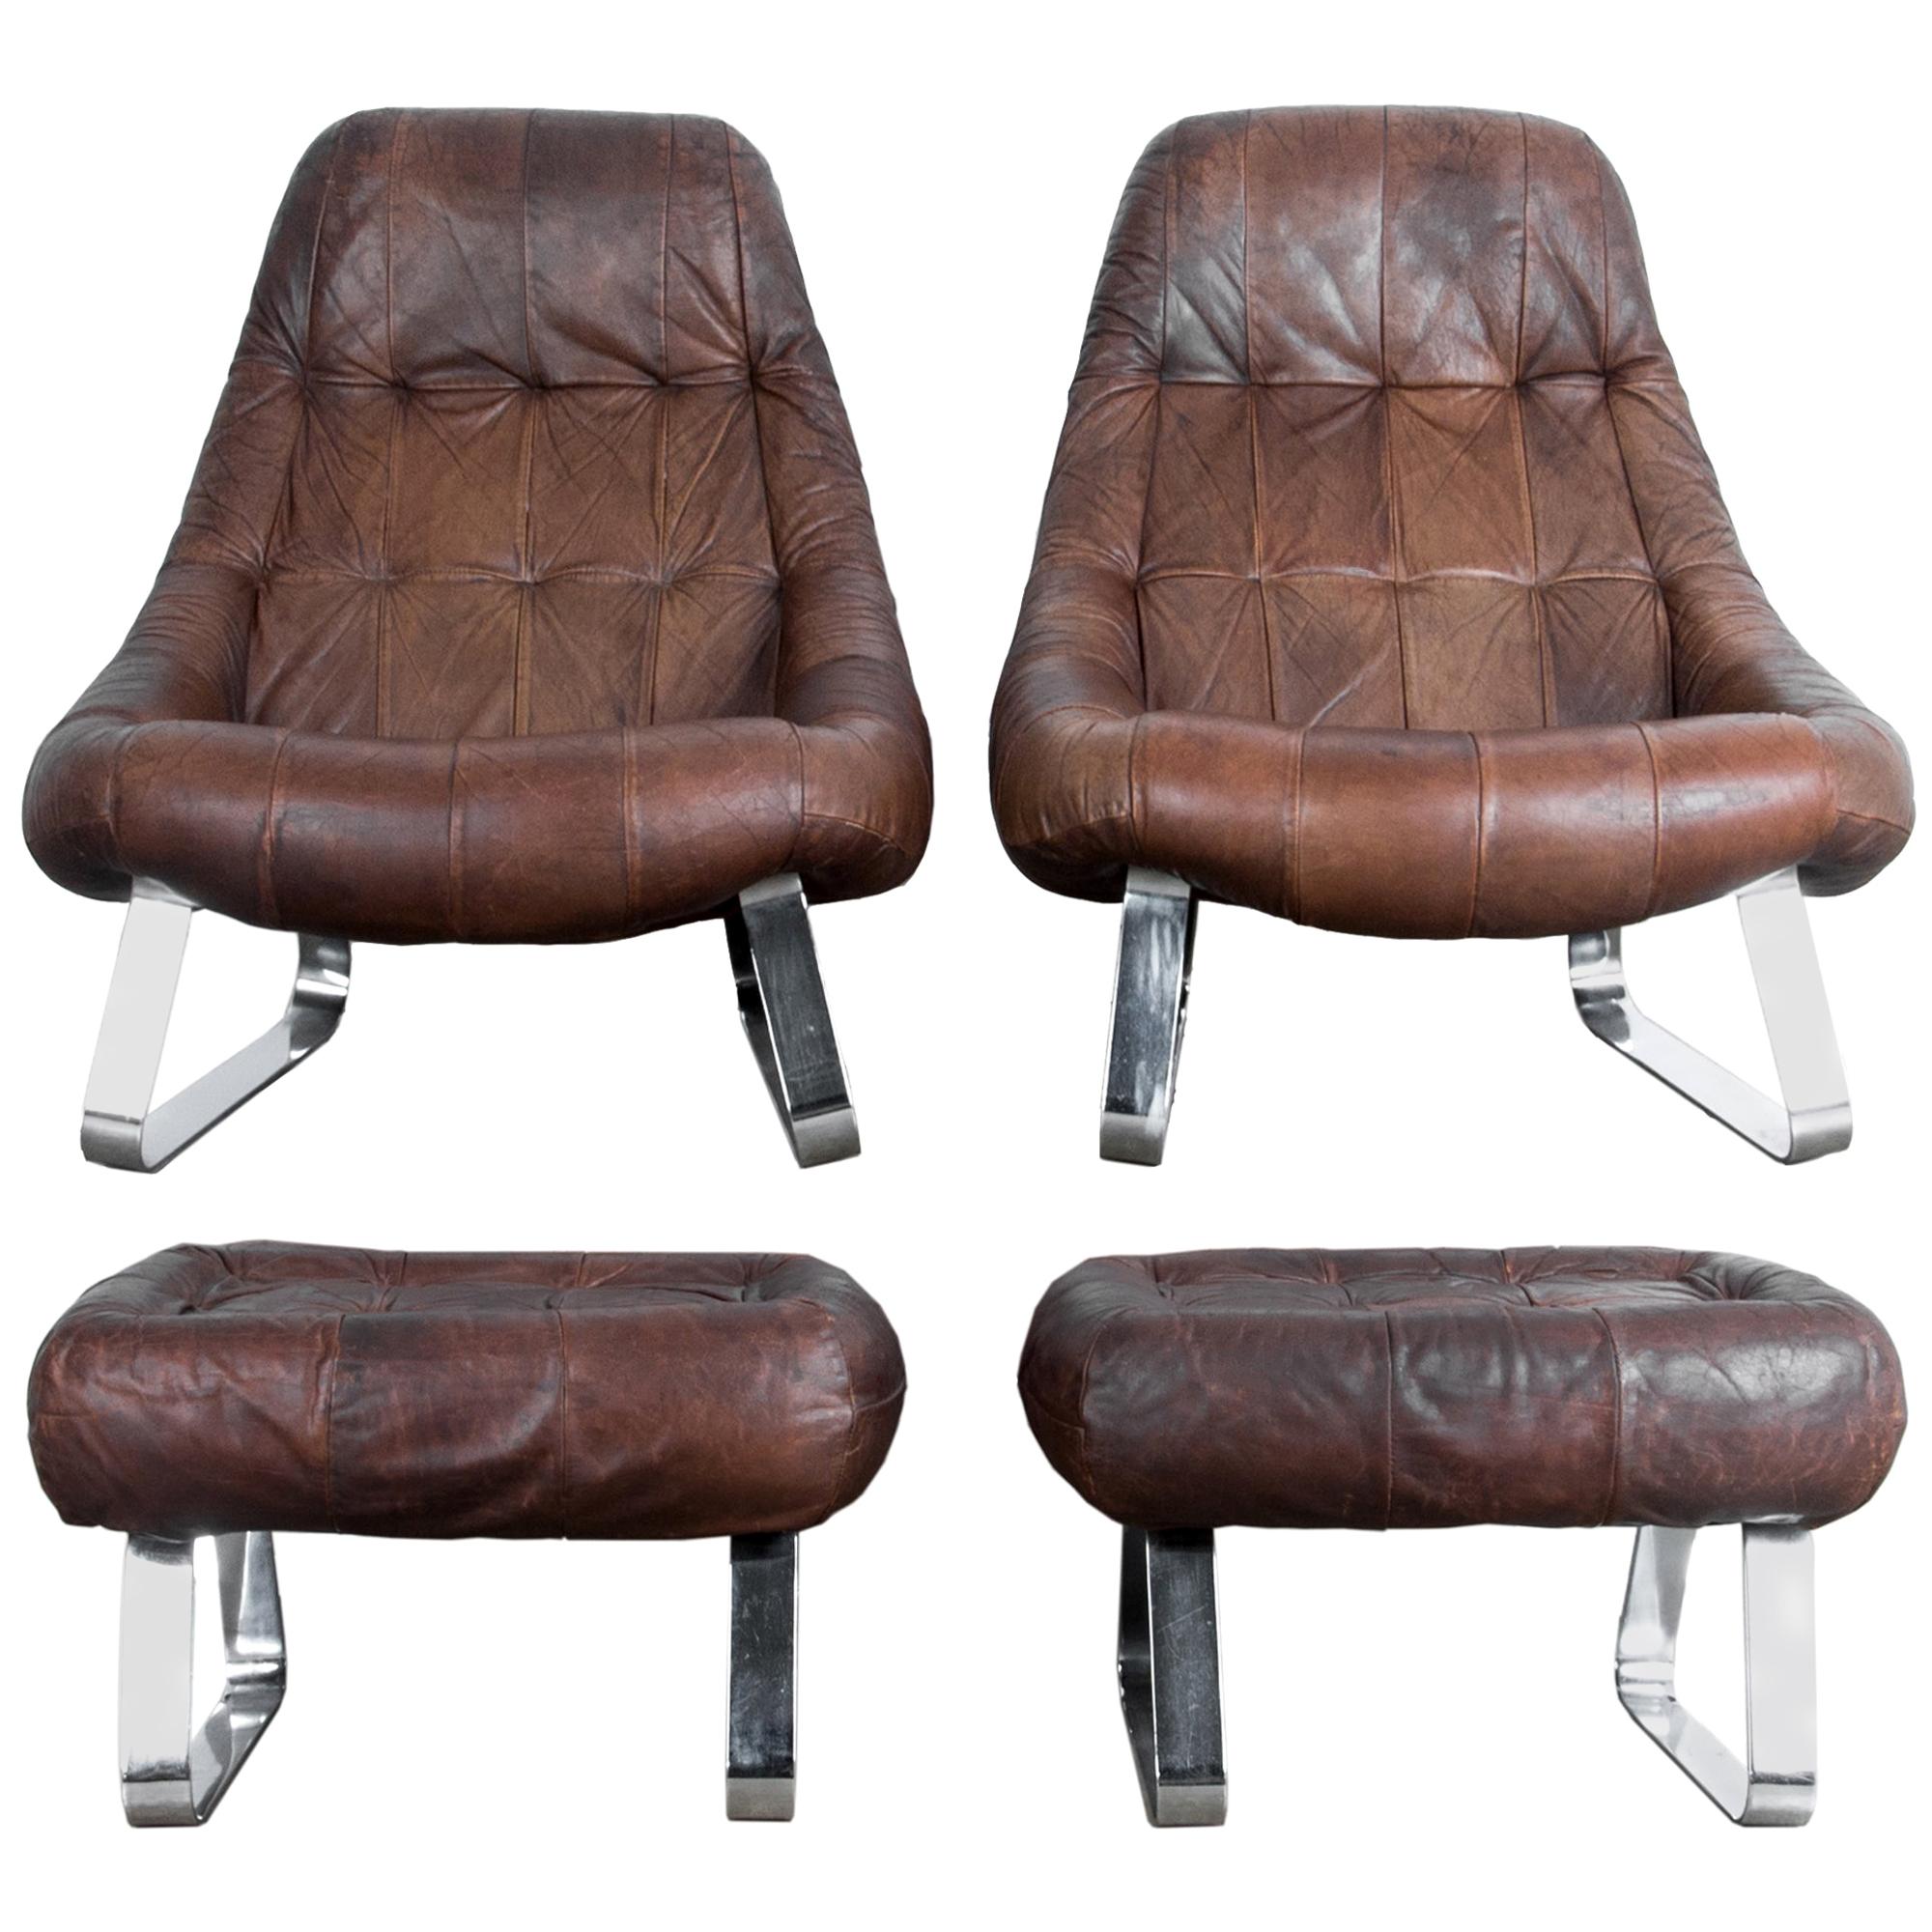 Percival Lafer Dark Brown Chrome Leather Earth Chair with Ottoman, a Pair